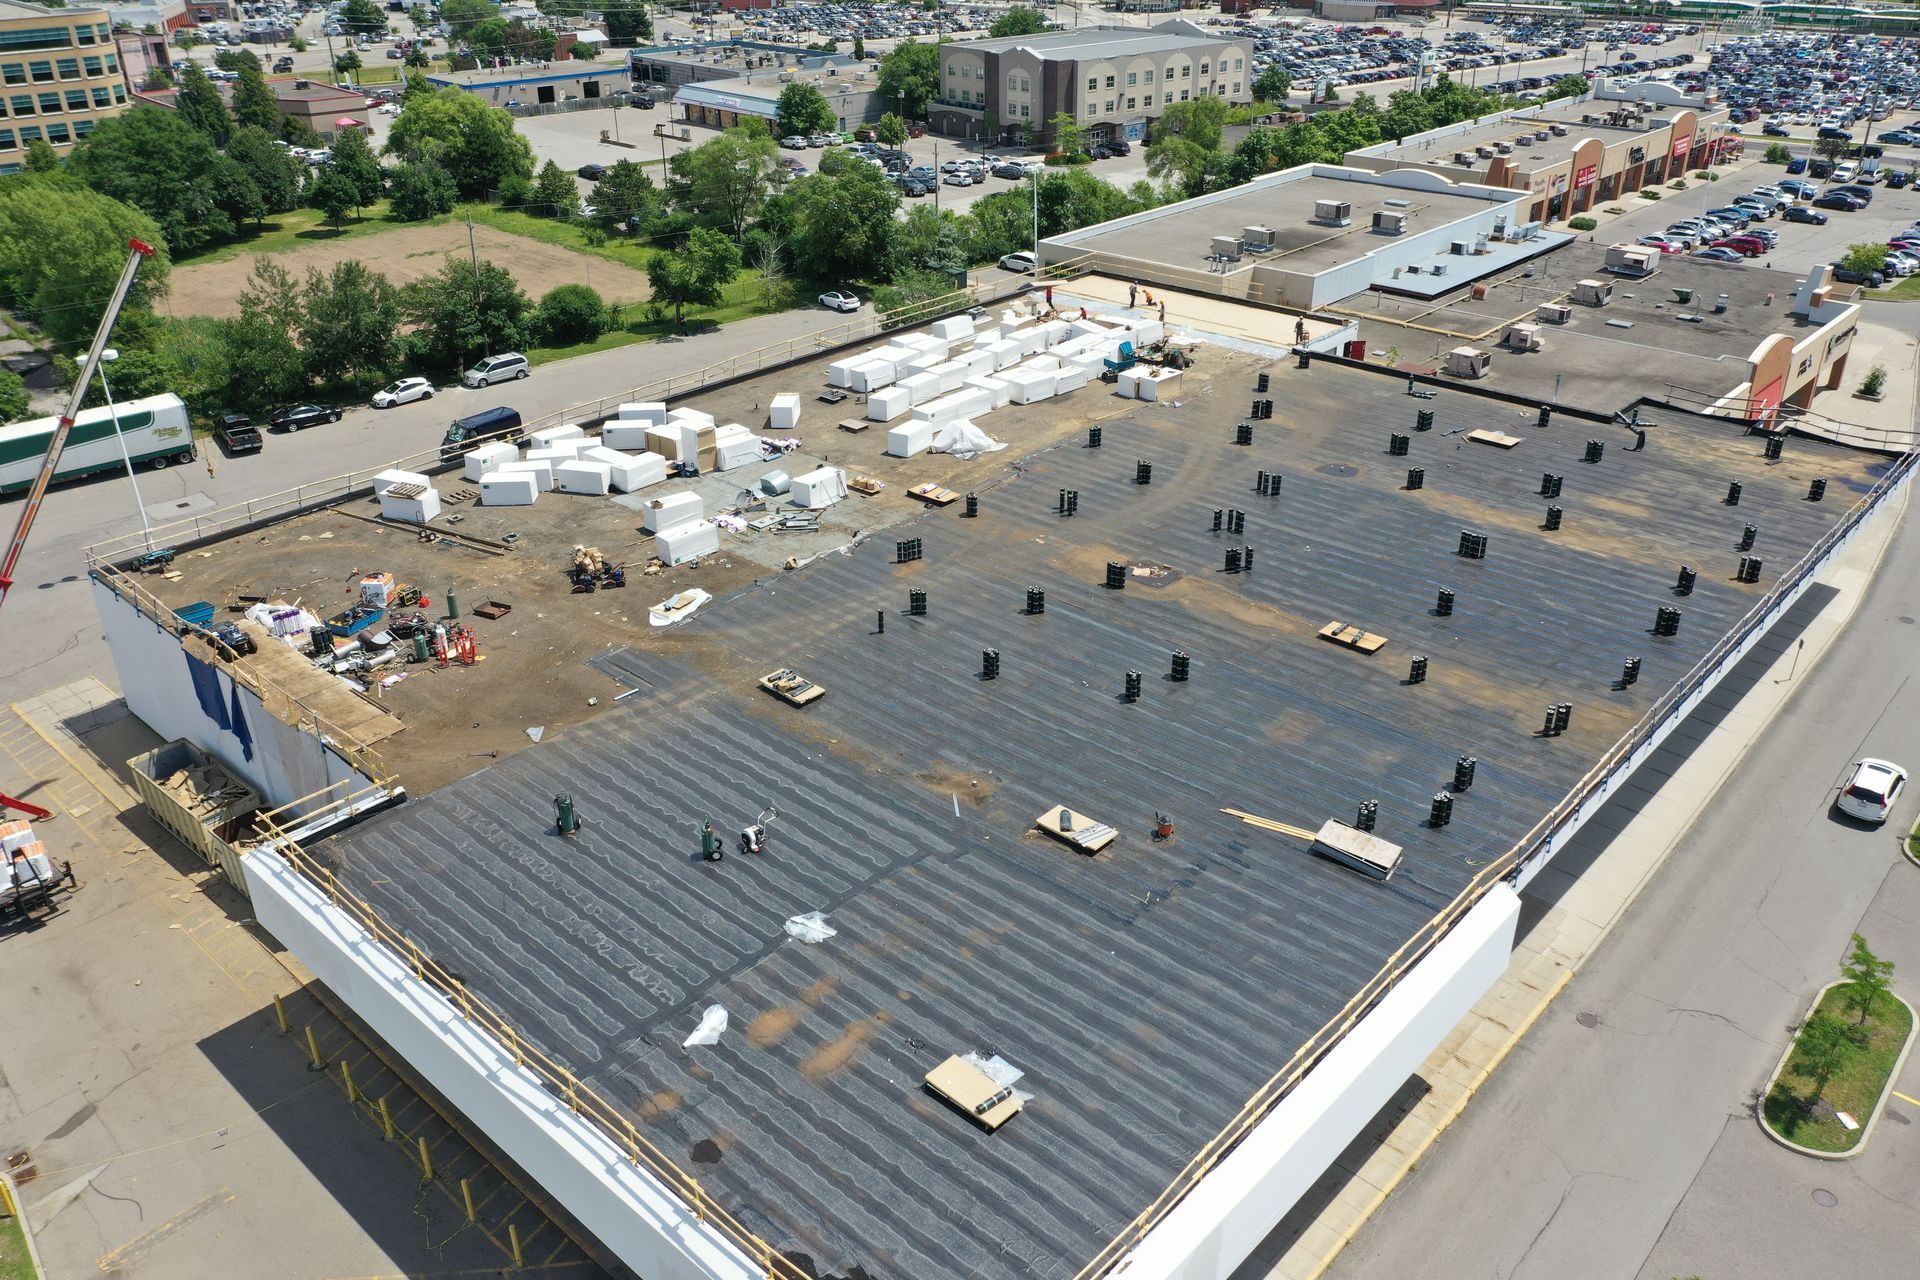 An aerial view of a large building with a roof that is being repaired.